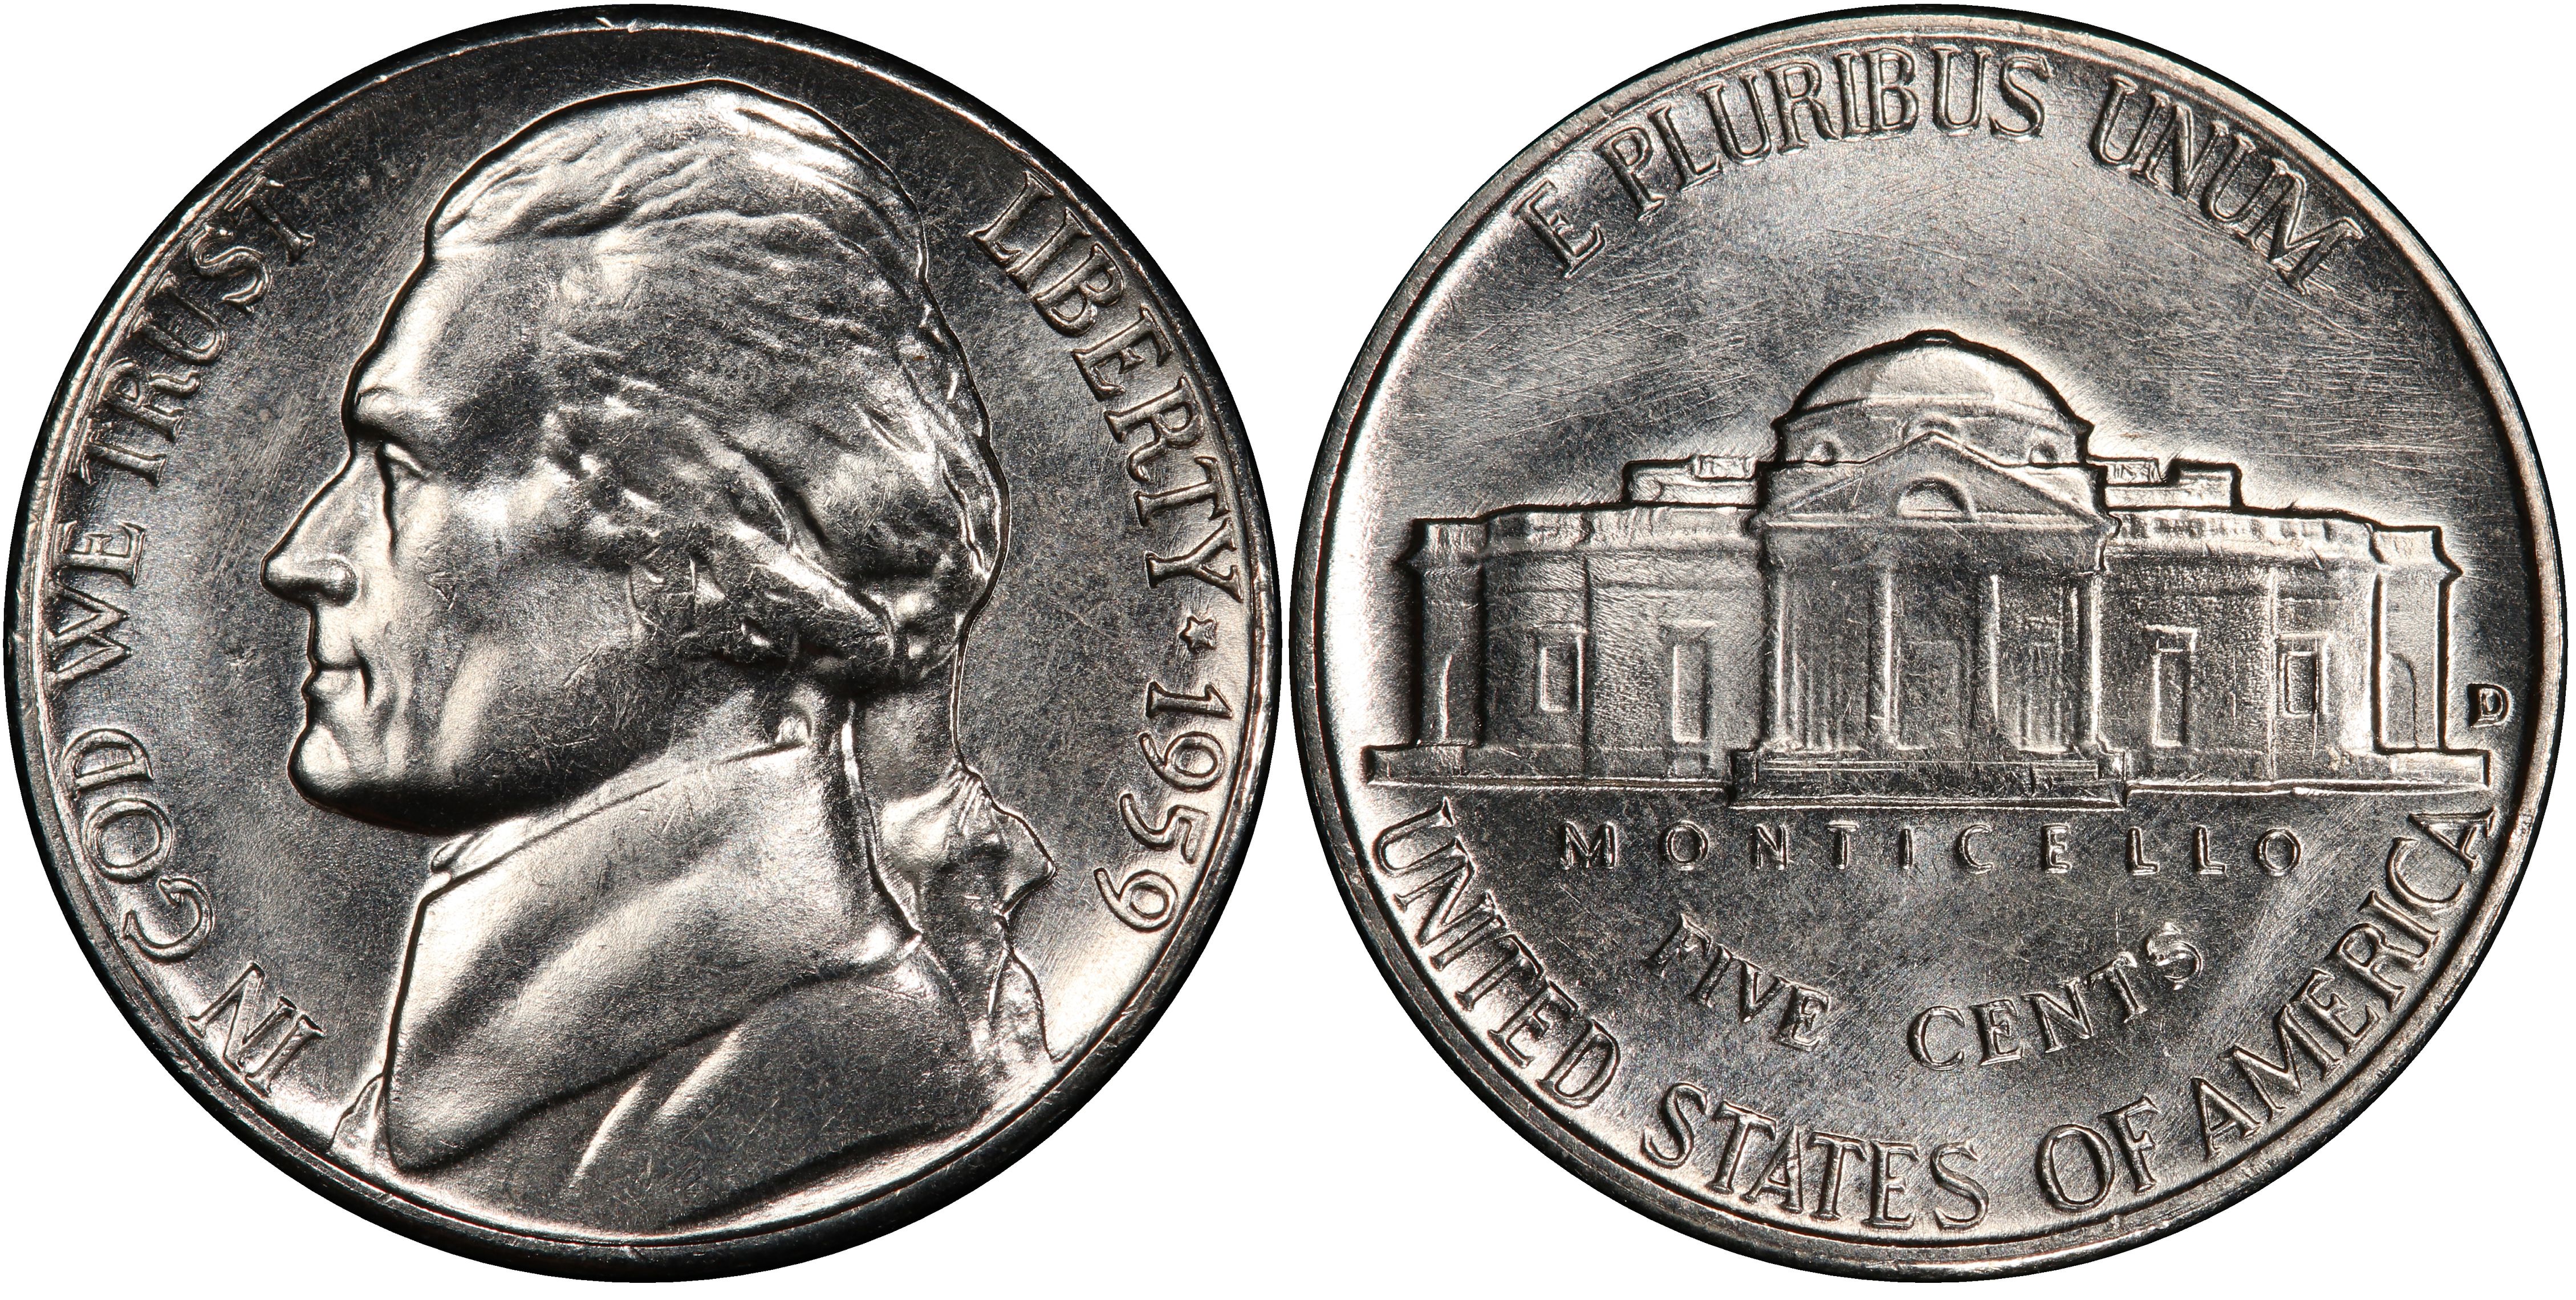 Details about   1959 Jefferson Nickel certified by NGC MS64 